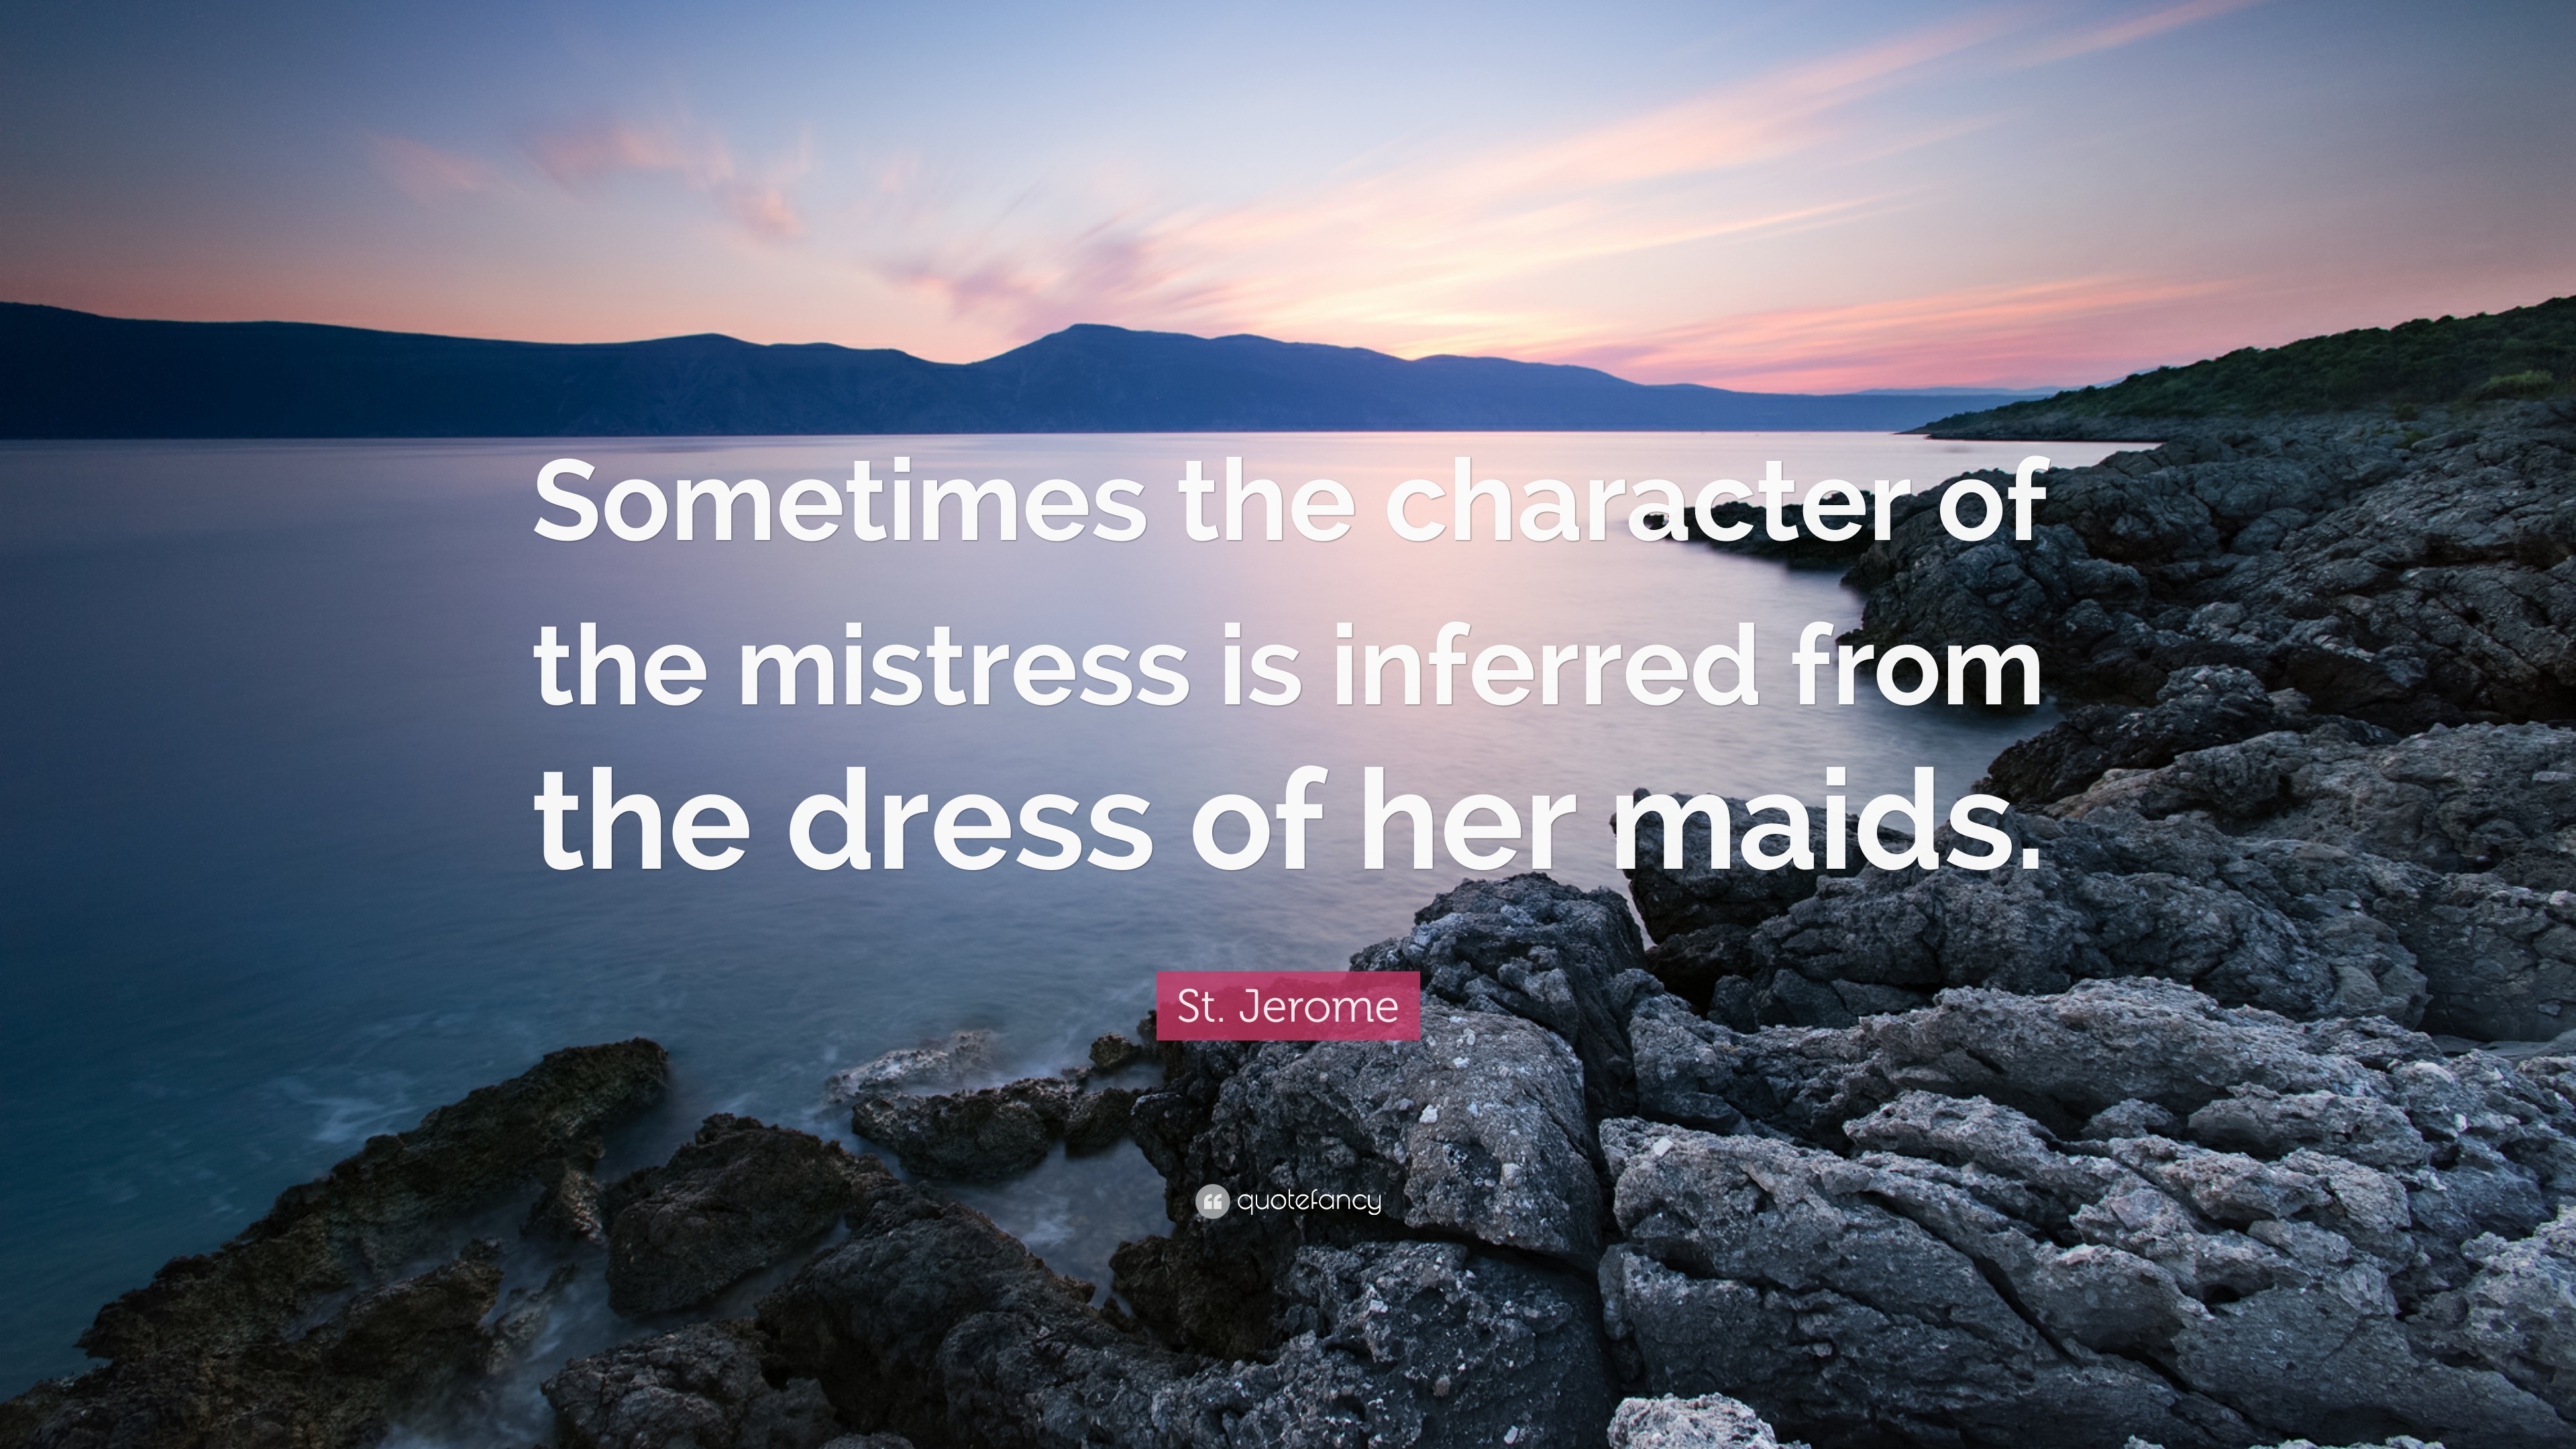 St. Jerome Quote: “Sometimes the character of the mistress is